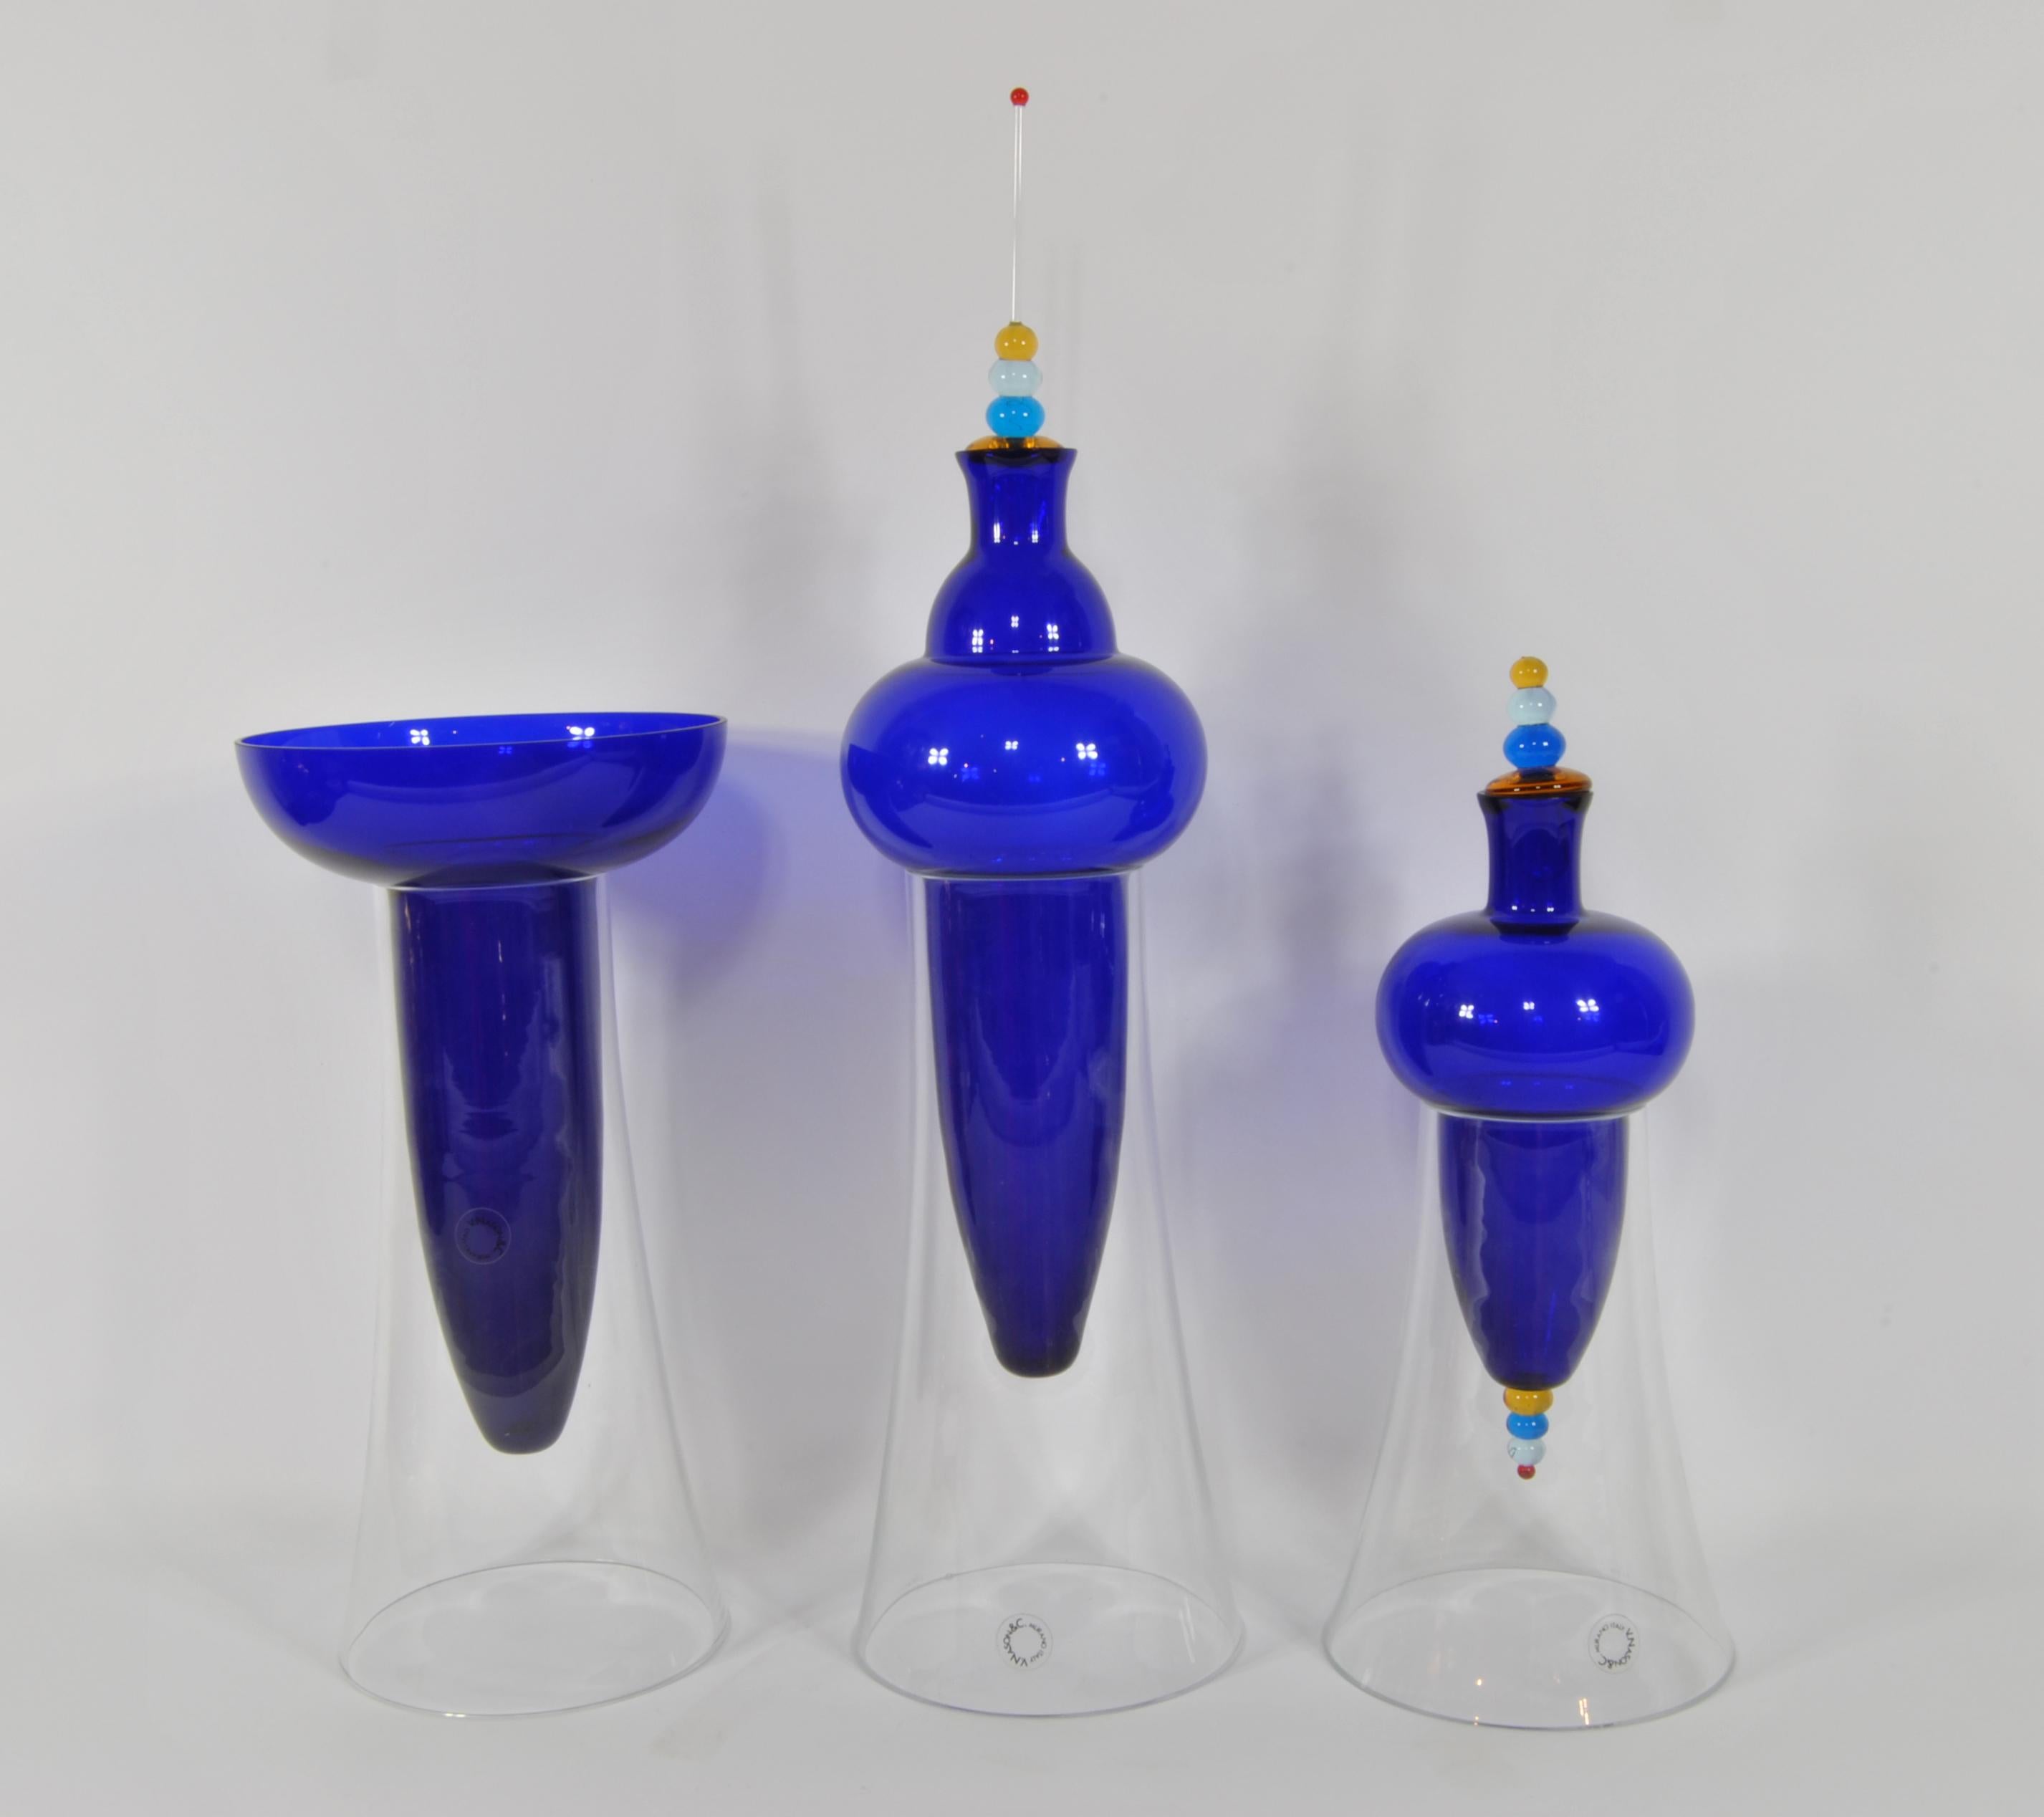 Triptych of vases, design Carlo Nason, production V. Nason & C..
Murano glass, crystal bases.
Measures: 1: diameter cm 14 x height 54,
2: diameter cm 14 x height 33,
3: diameter cm 14 x height 35.